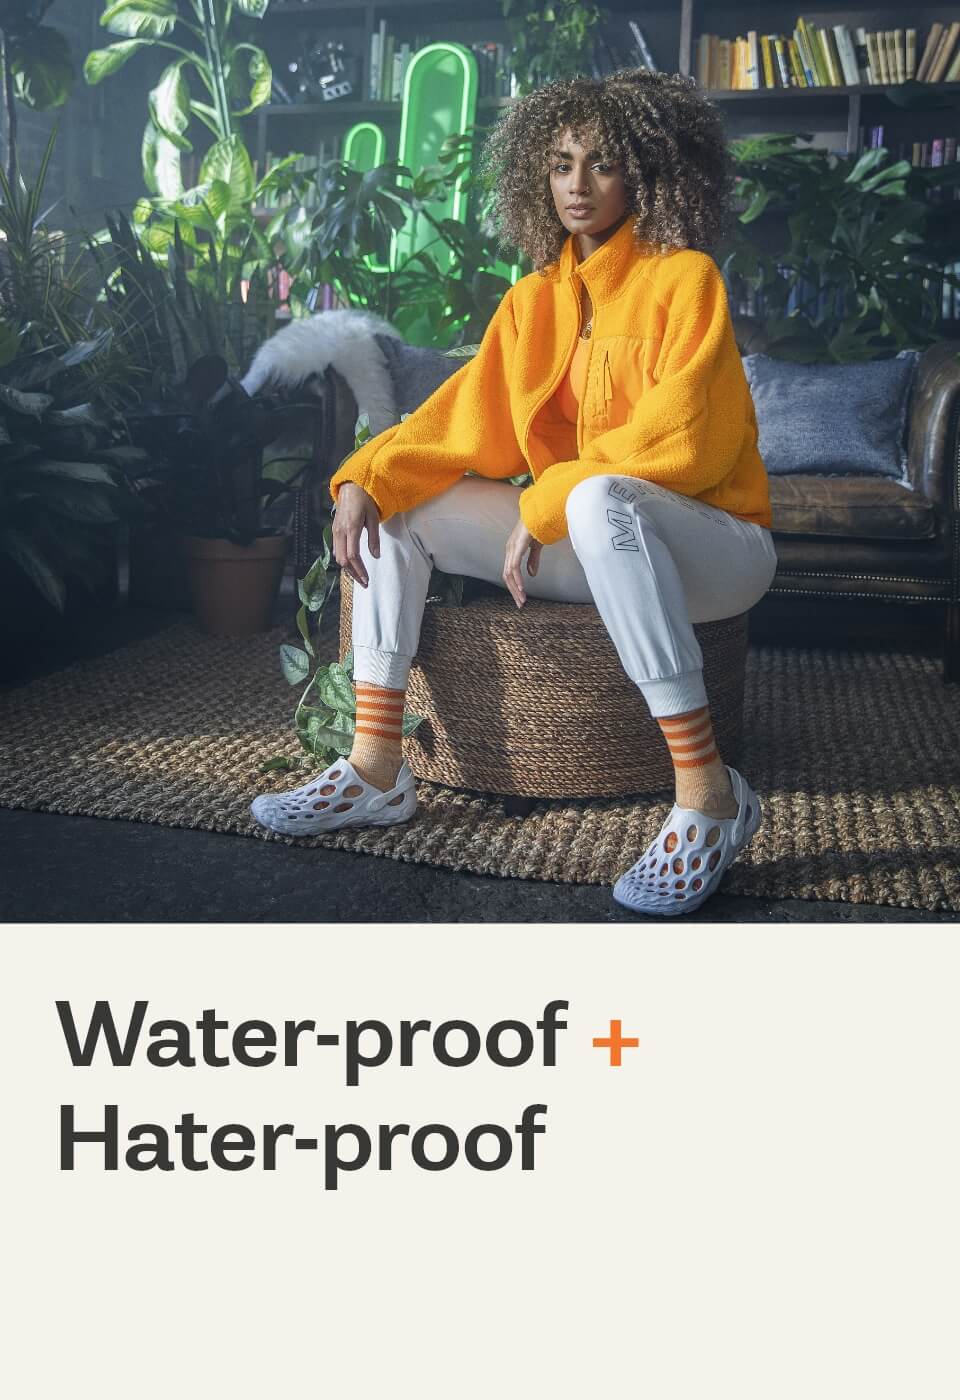 Person looking cool, sitting next to some plants, wearing hydro mocs and not caring about haters.